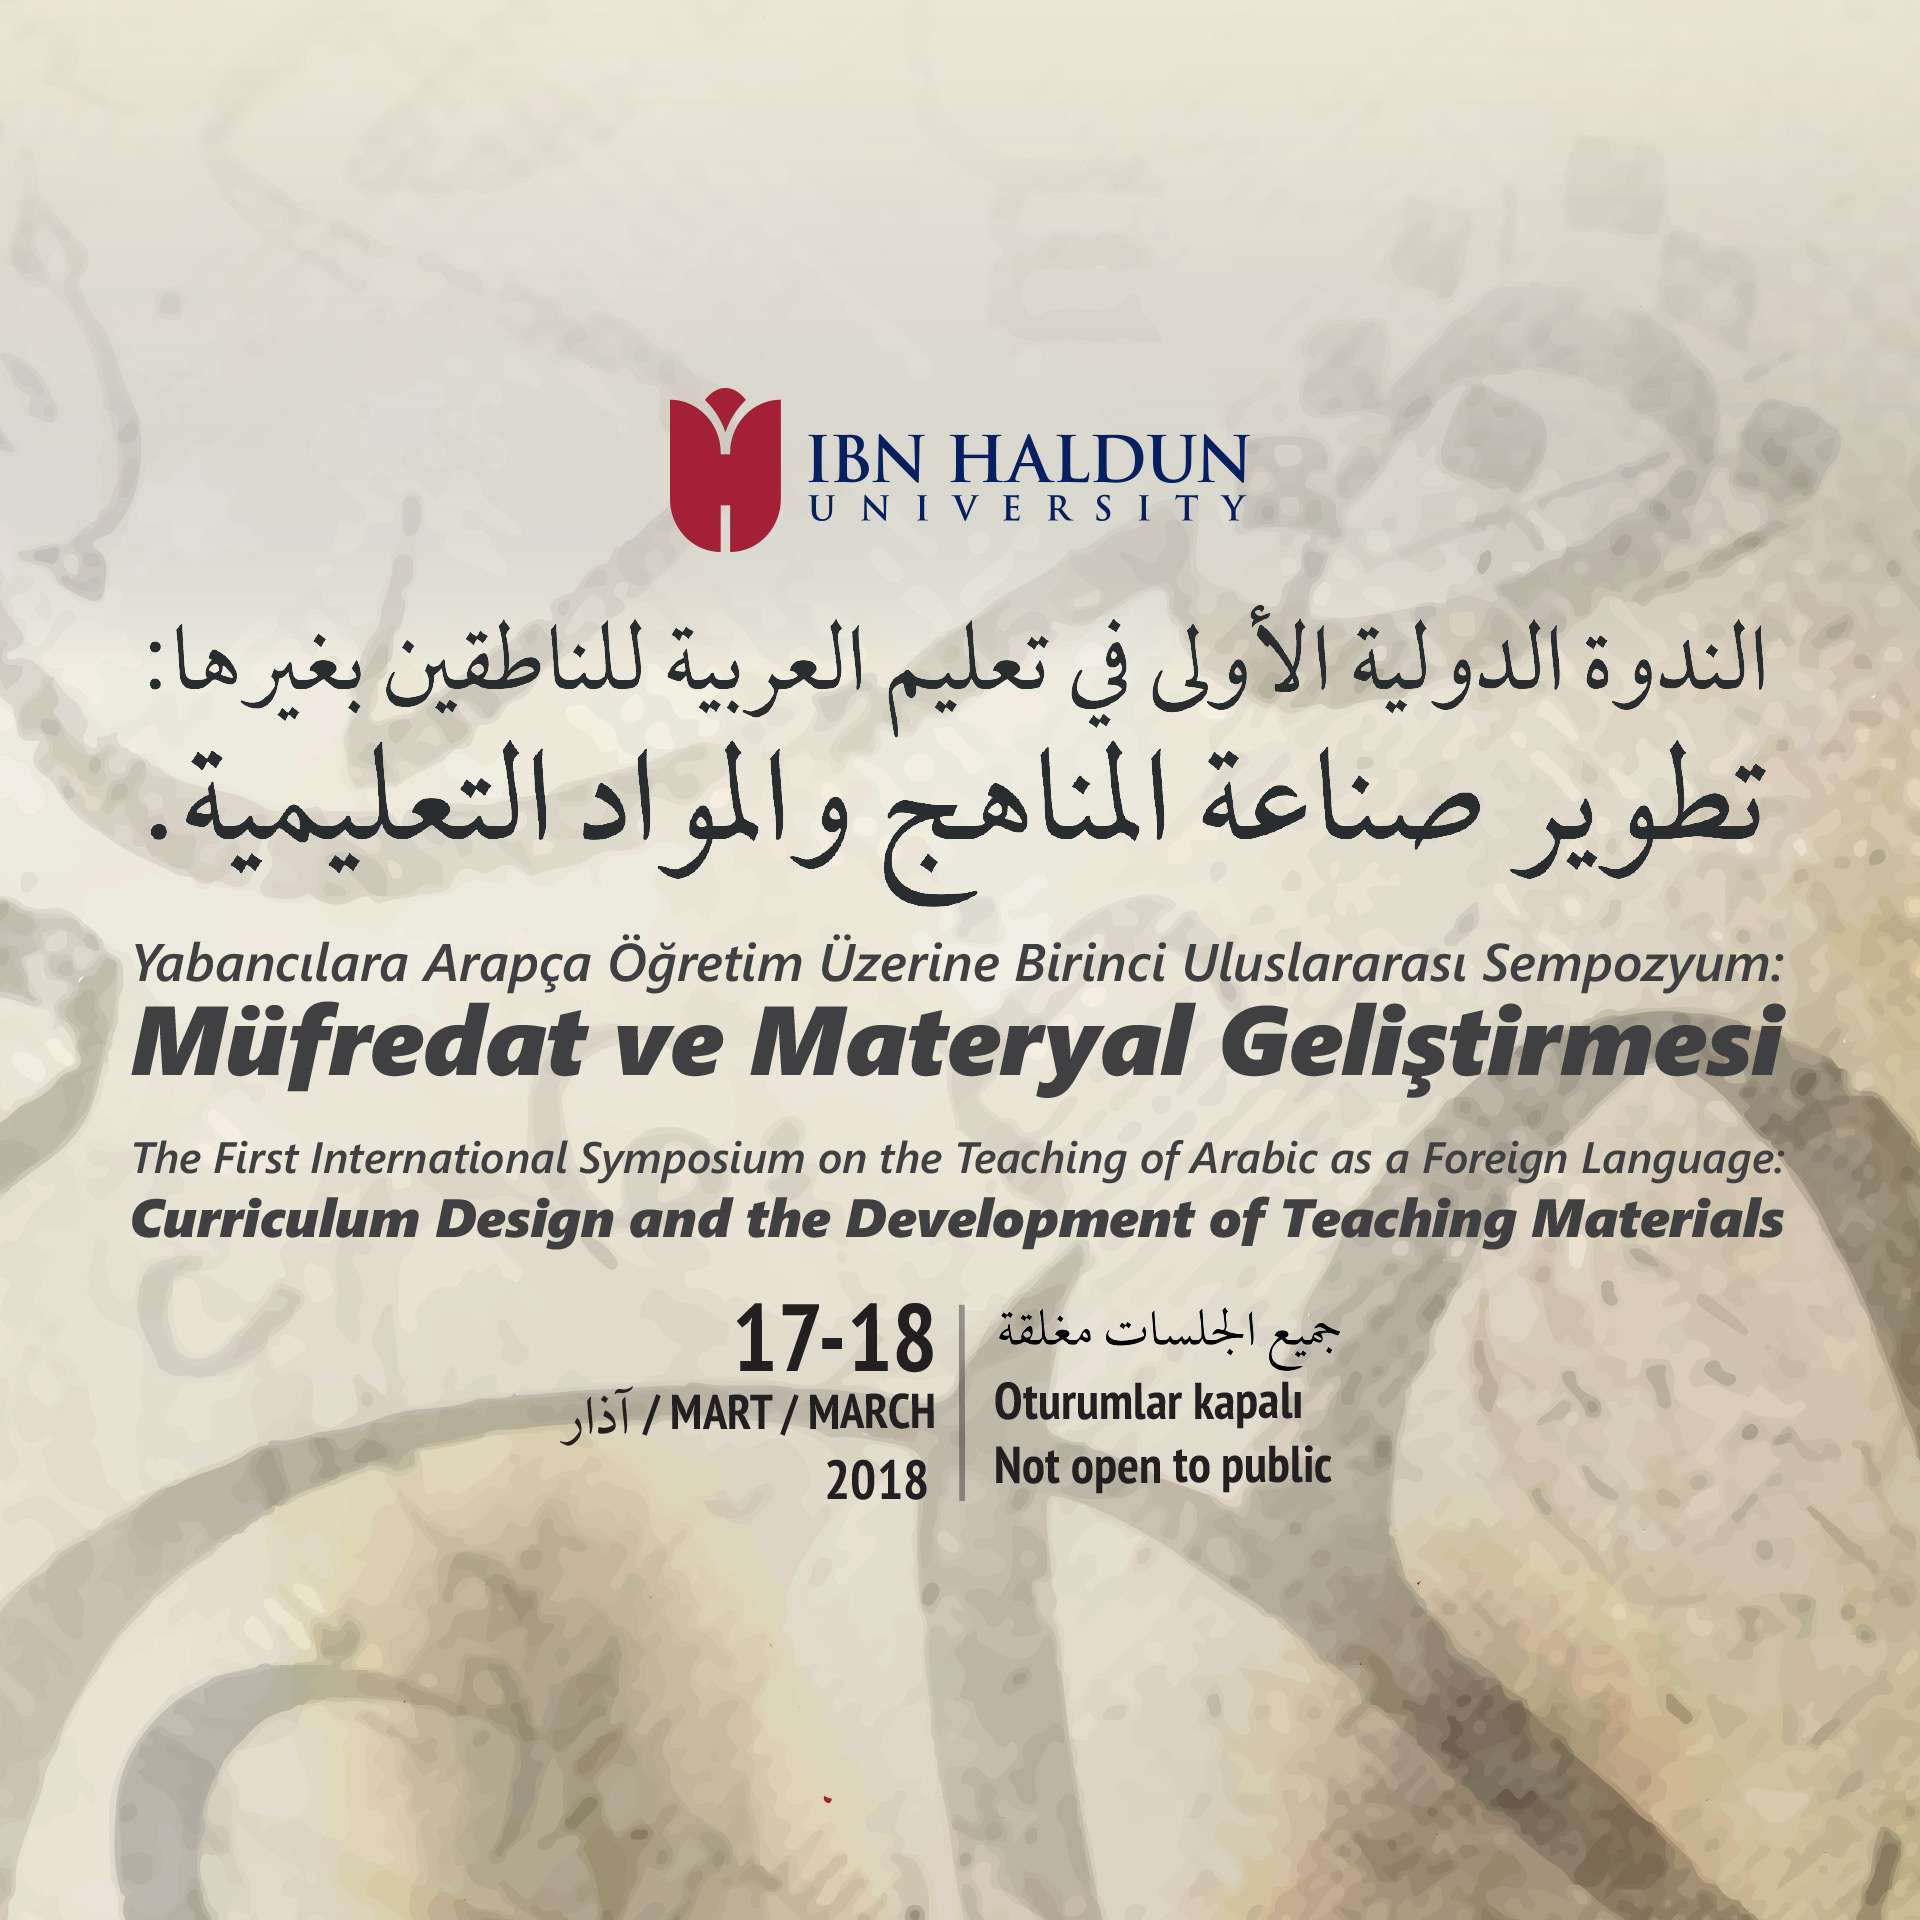 The First International Symposium on the Teaching of Arabic as a Foreign Language: Curriculum Design and the Development of Teaching Materials